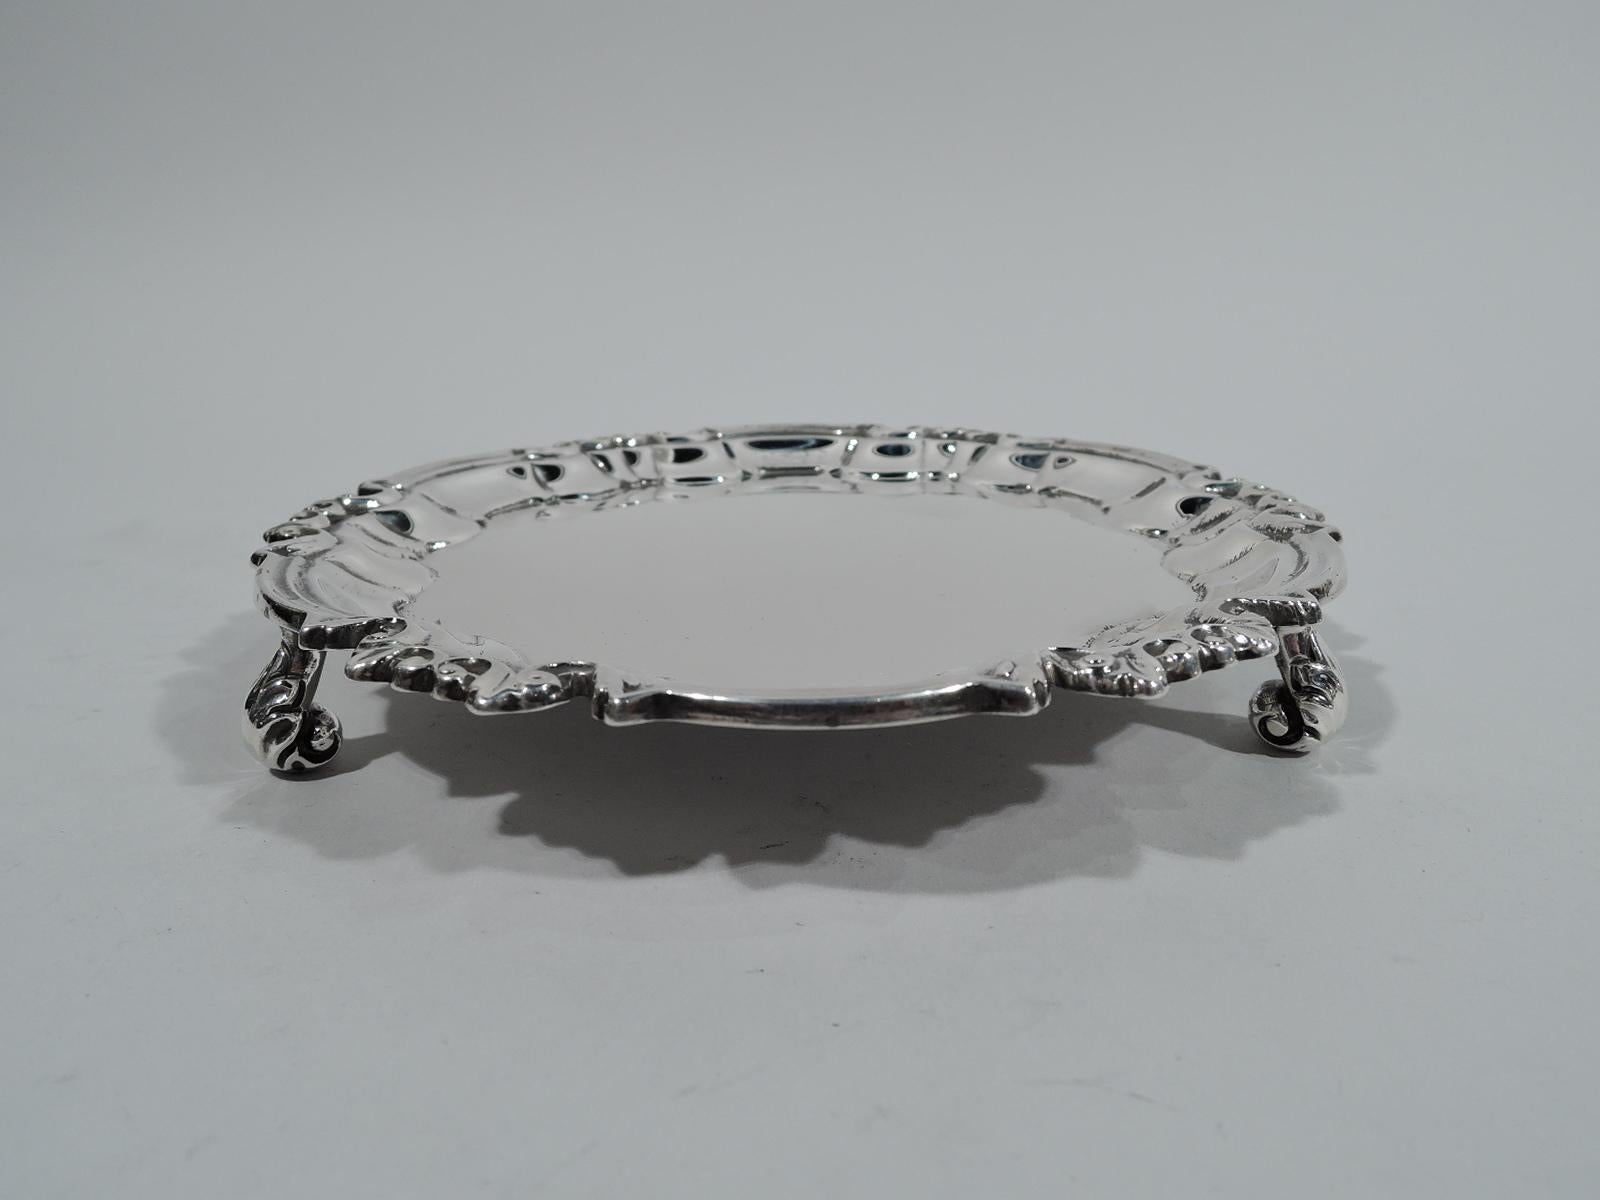 Edwardian Georgian sterling silver salver. Made by William Hutton & Sons, Ltd in London in 1904. Round with 3 leaf-capped volute supports. Molded rim with volute scrolls. Fully marked. Weight: 7.5 troy ounces.